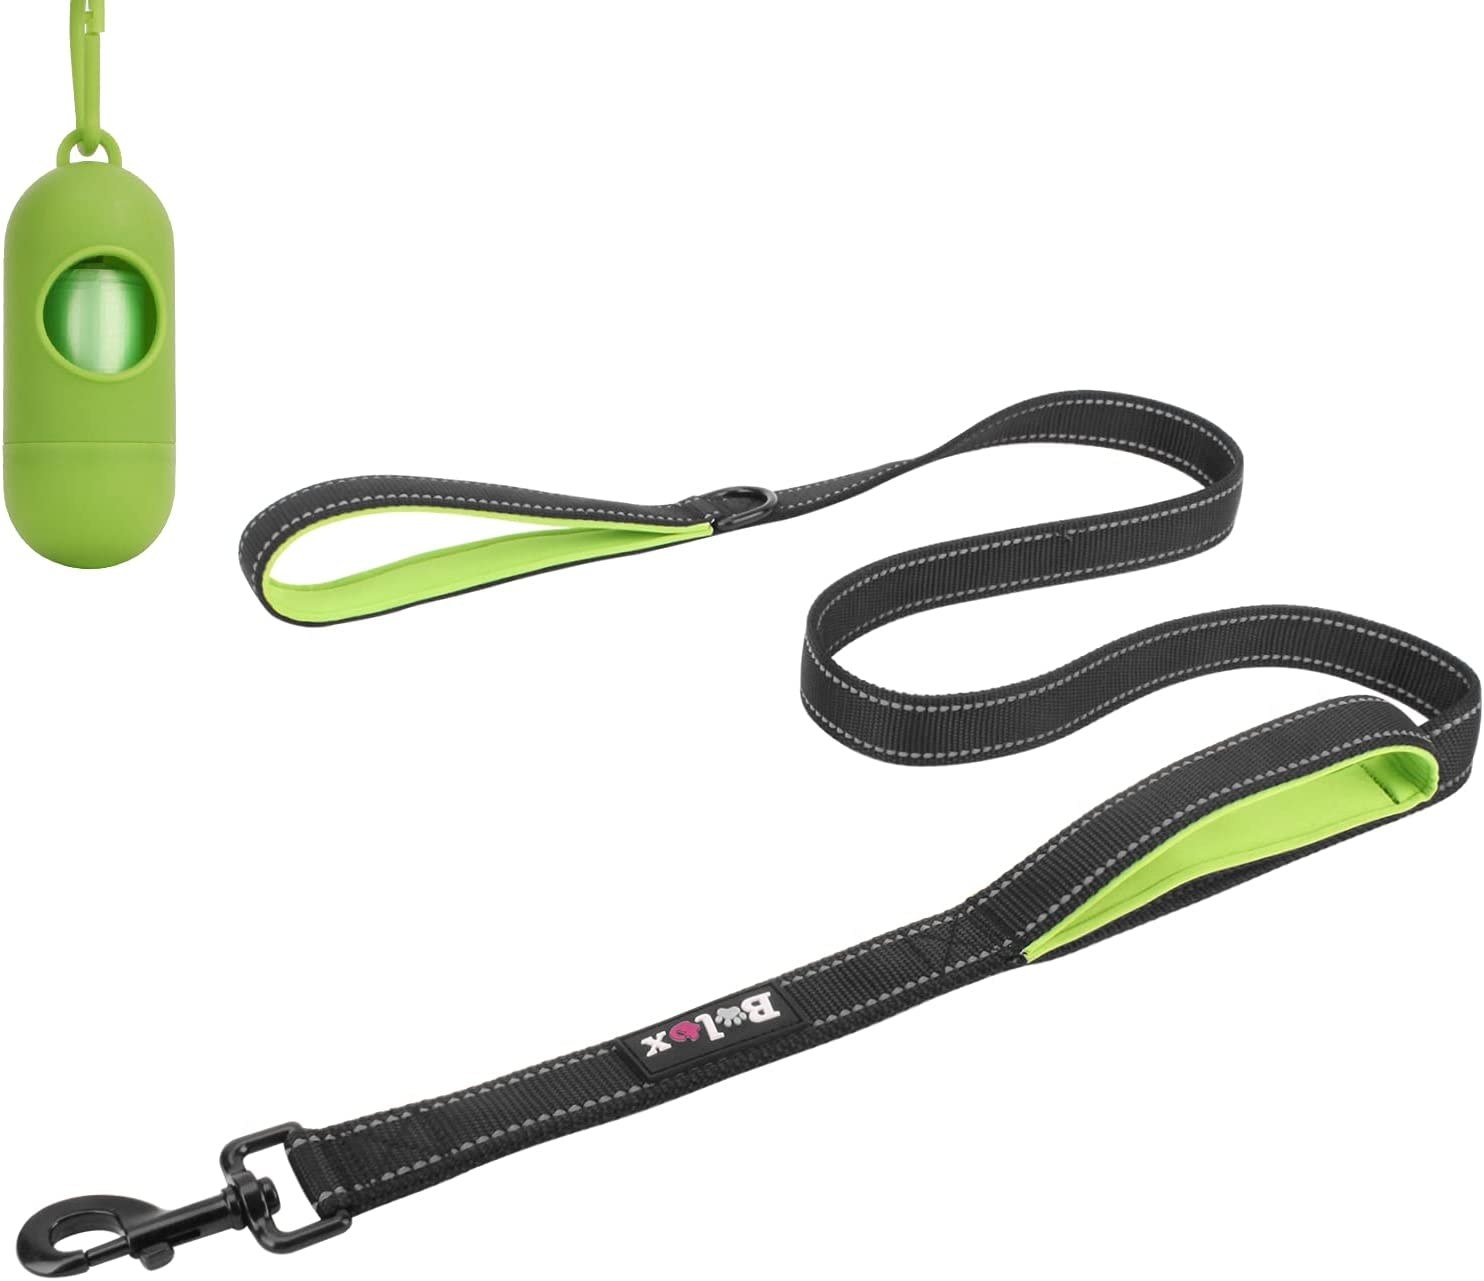 Green and black leash on white background